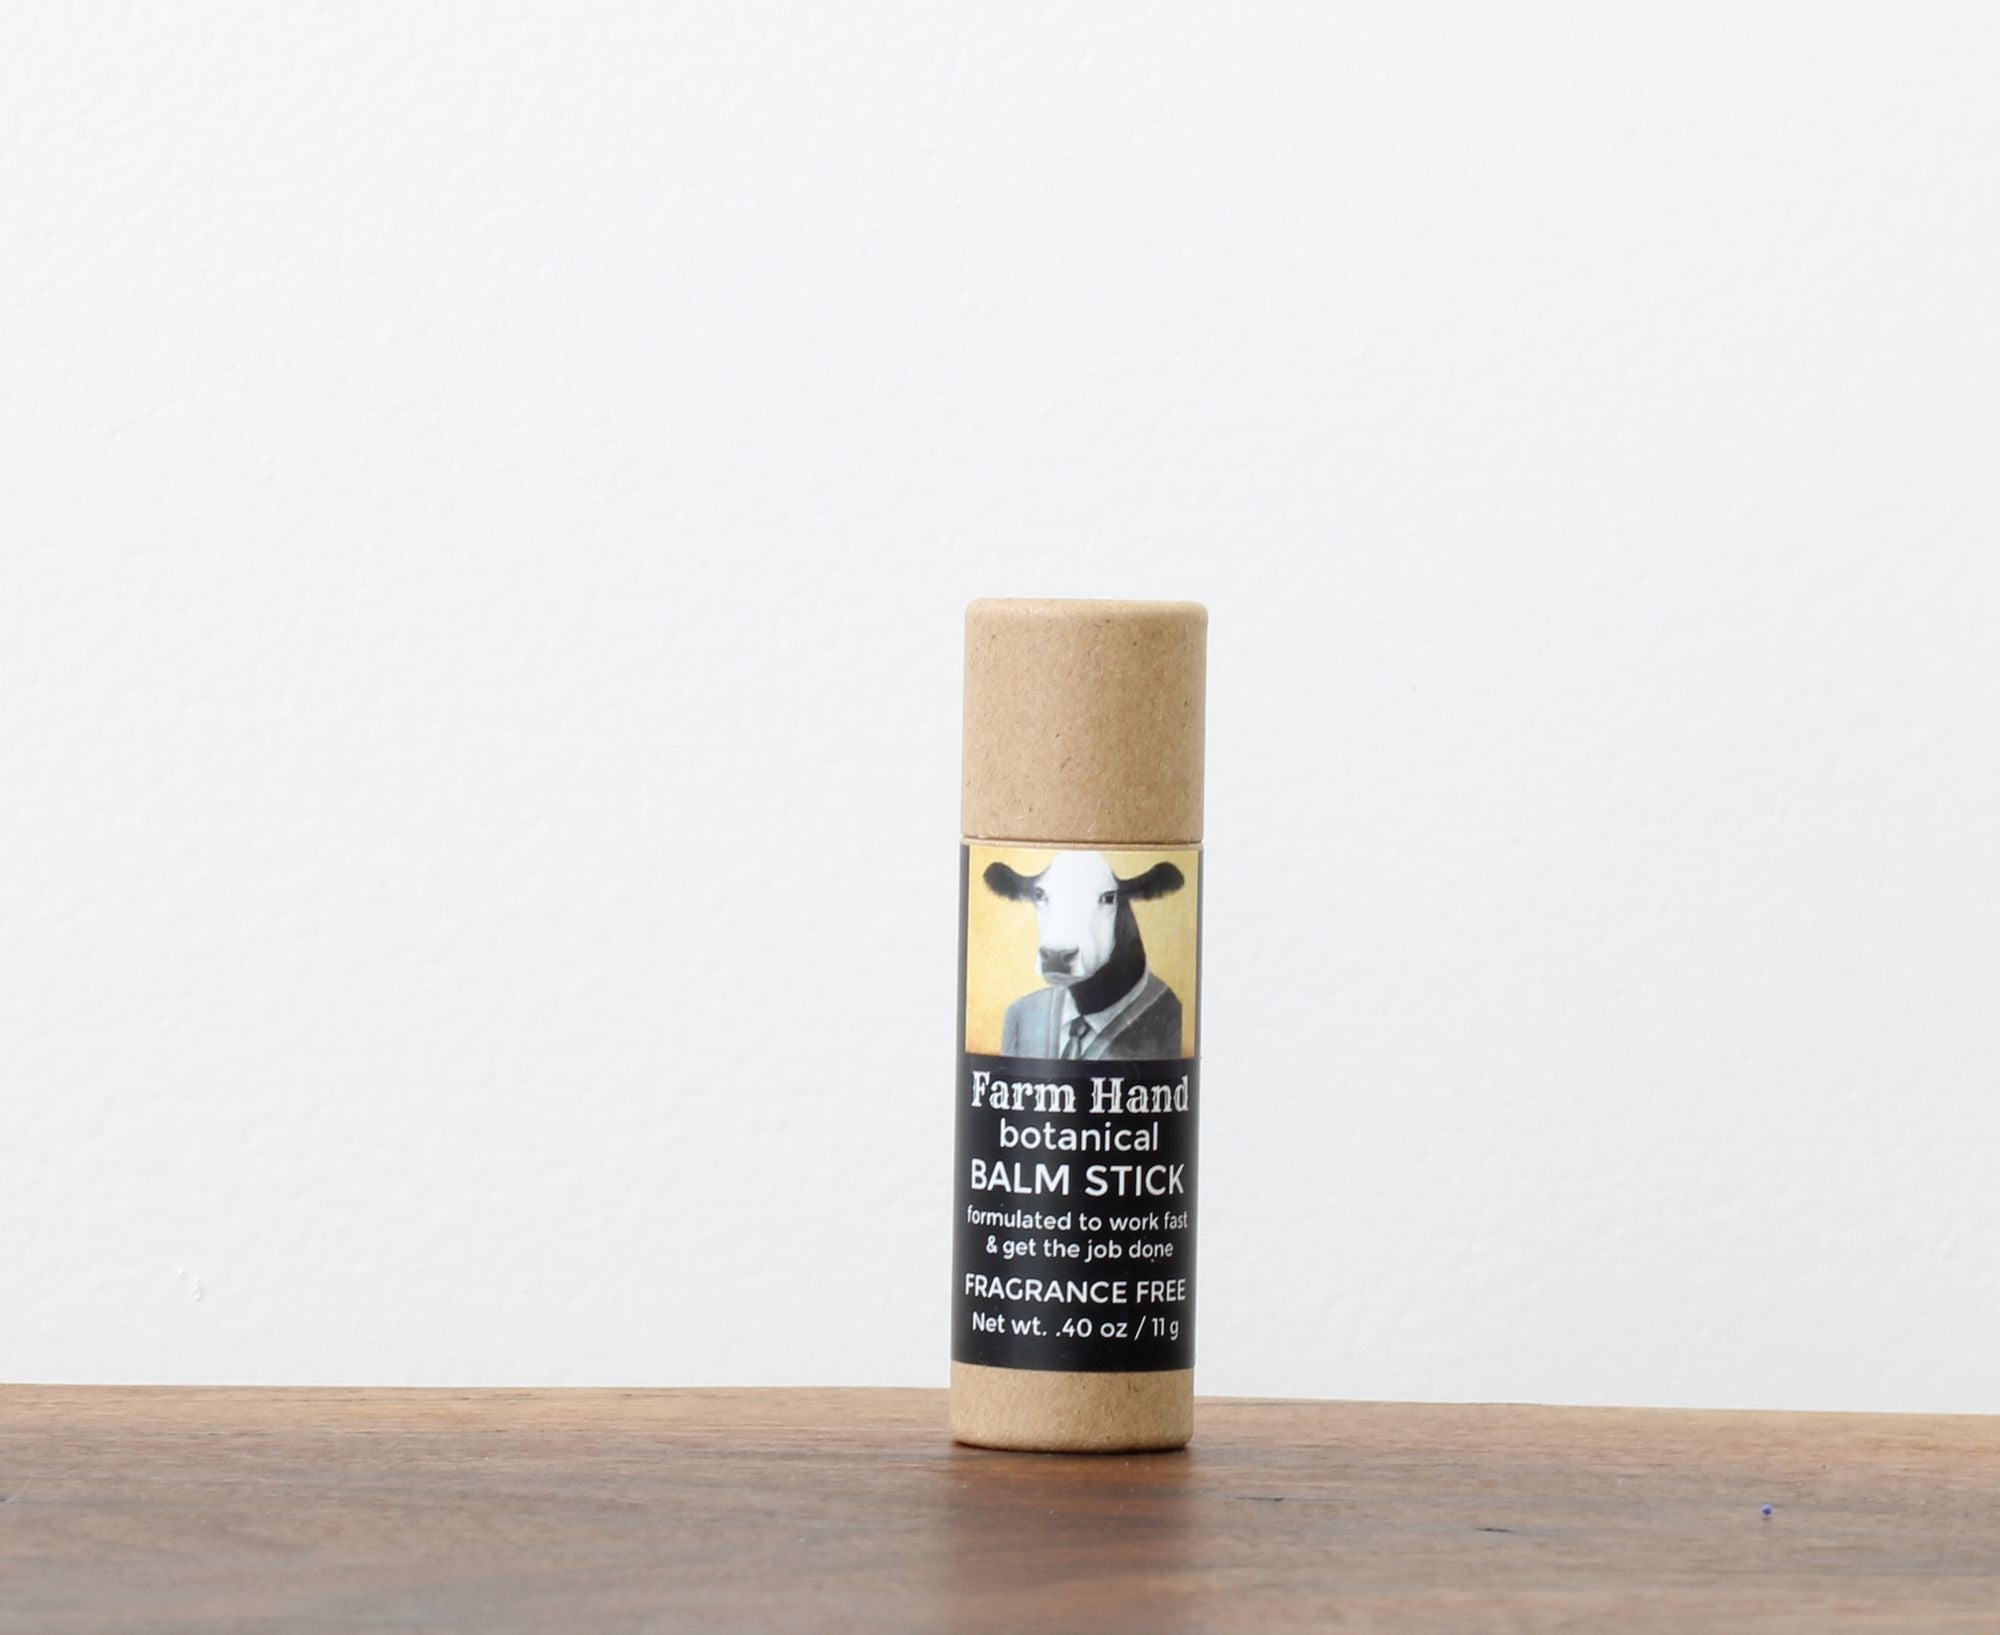 Farm Hand Botanical Balm Stick formulated to work fast and get the job done to nourish dry sensitive skin and it's fragrance free and contains emu oil